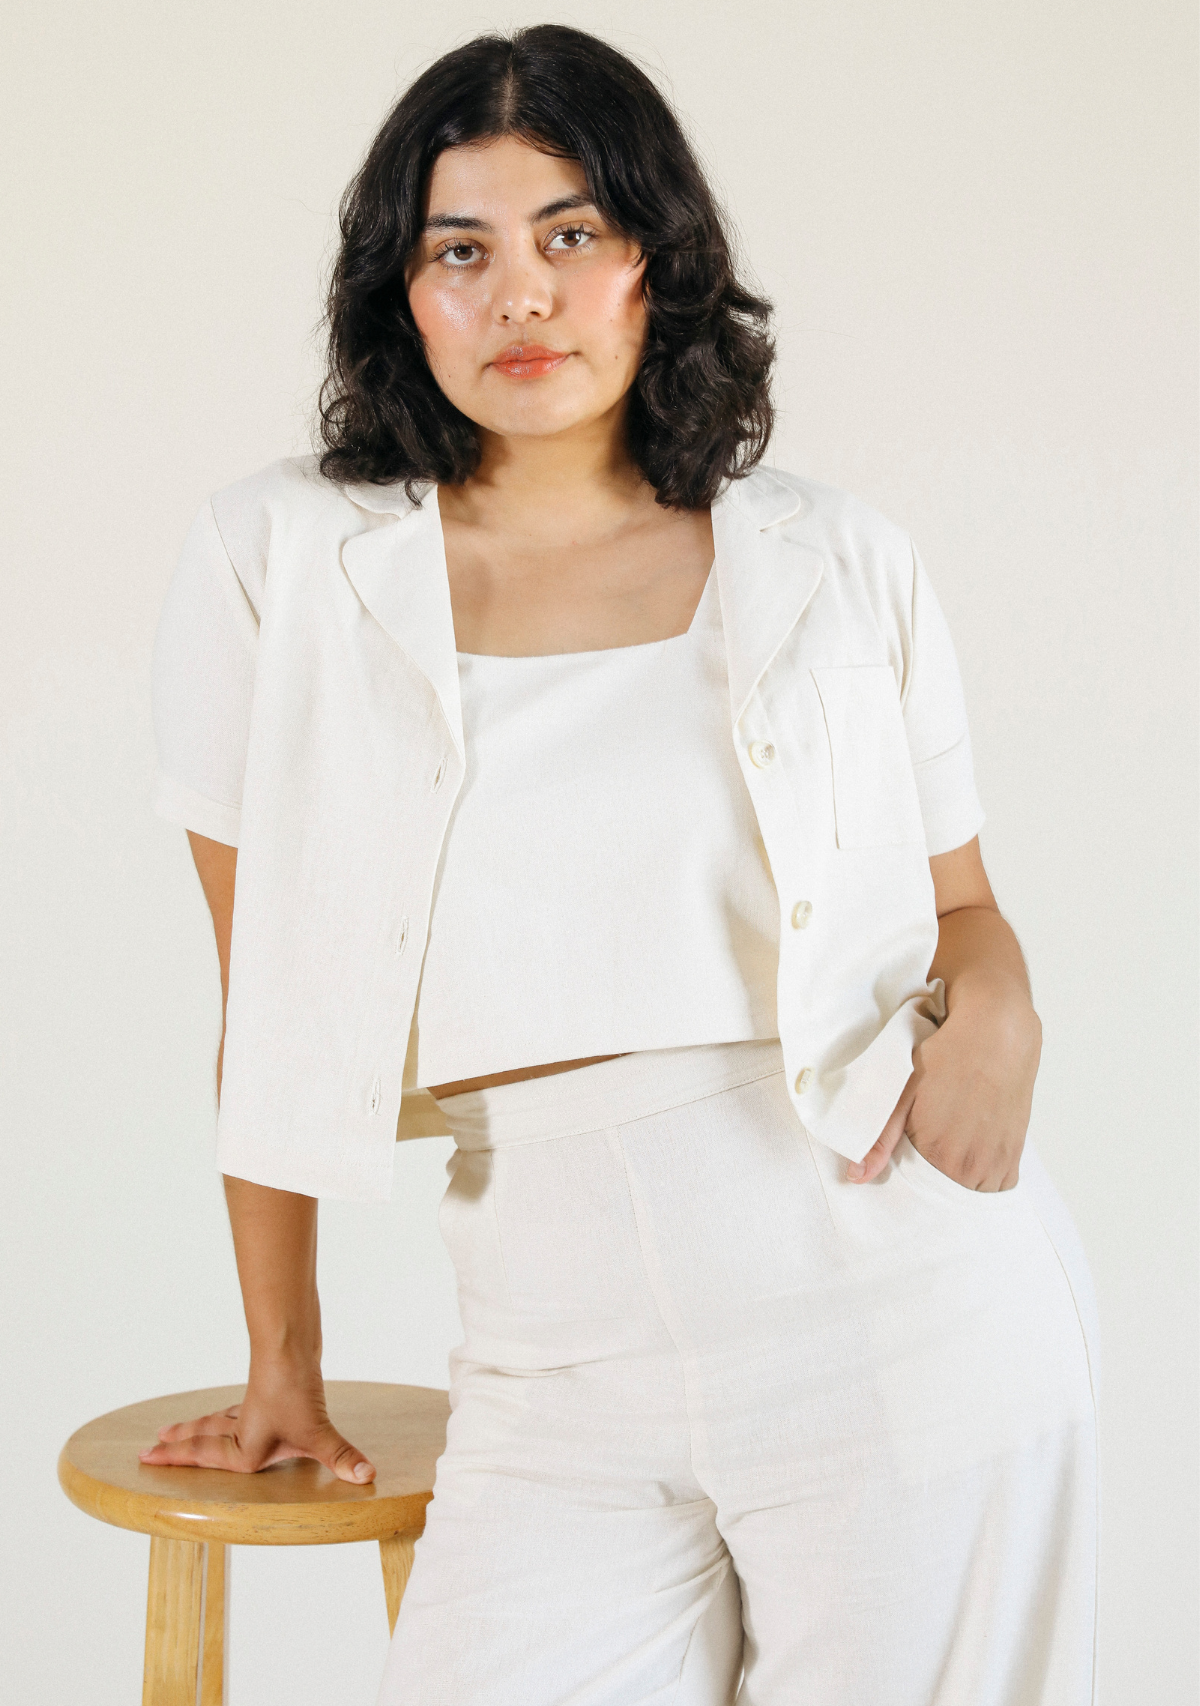 Women's Short Sleeve Linen Shirt Sizes XS-3X ethically and sustainably made